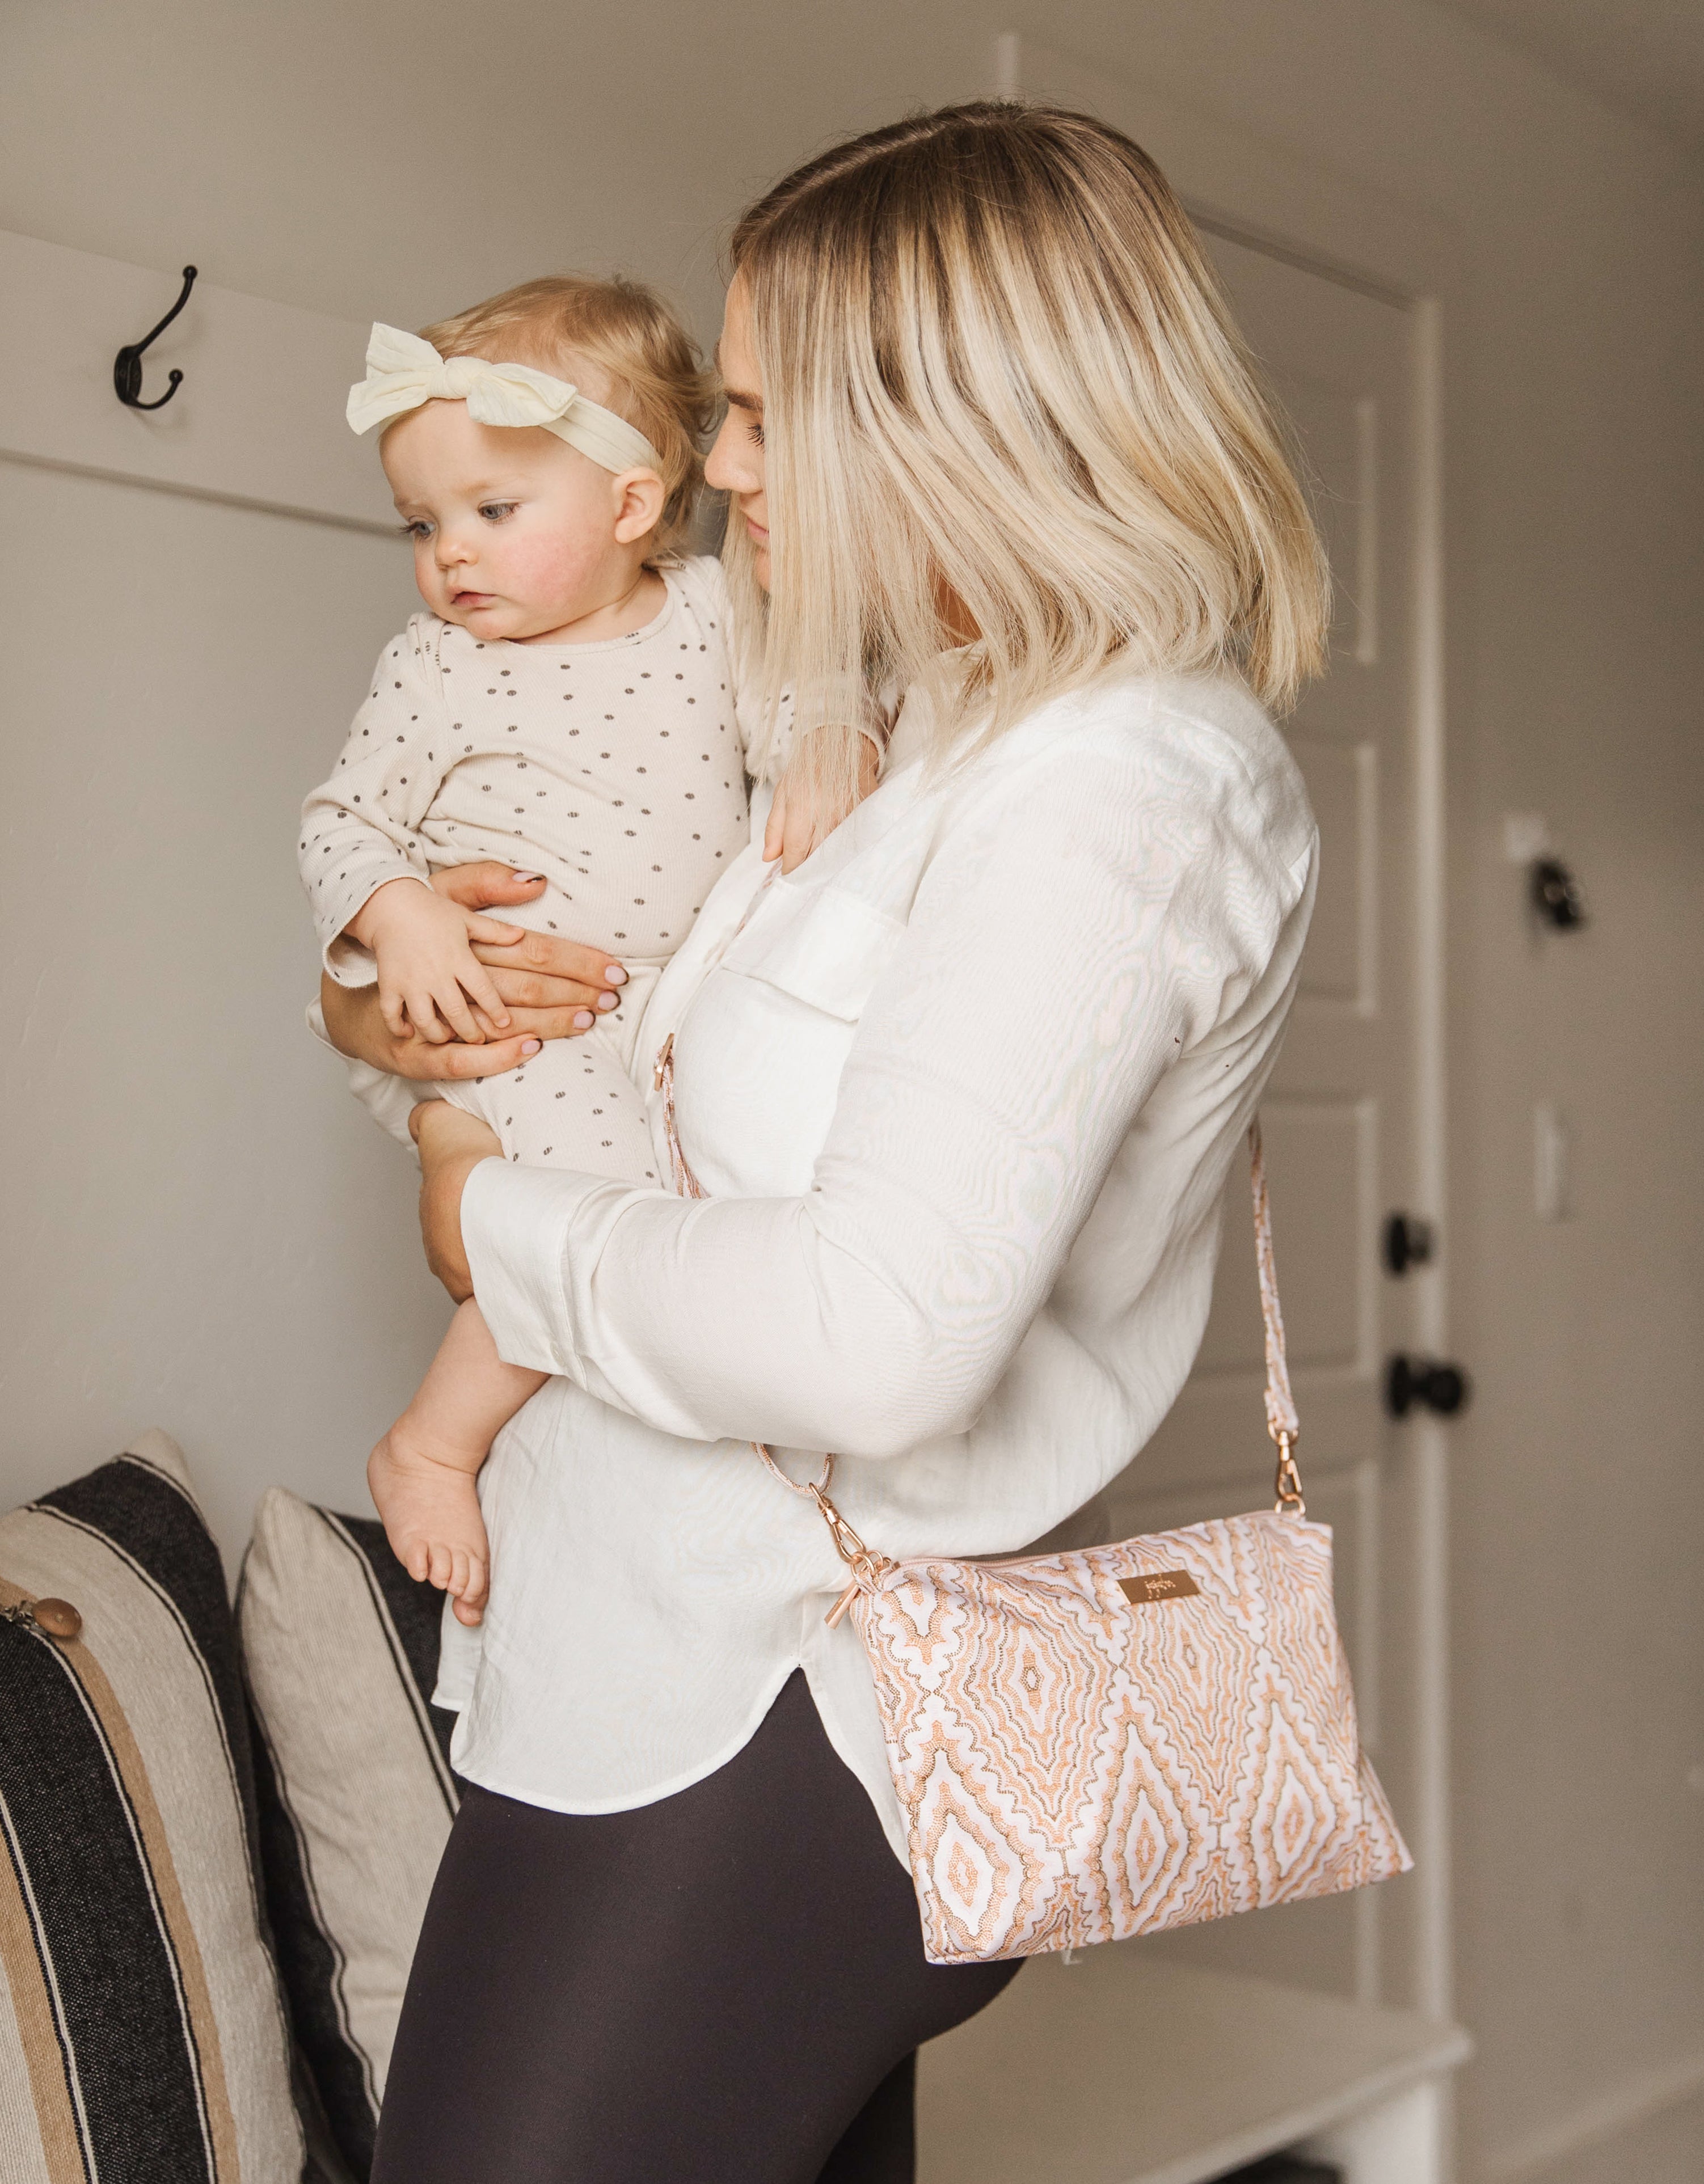 Pink, Orange and Brown Dotted Diamond Pattern Be Quick Worn as a crossbody bag by a woman carrying a baby.